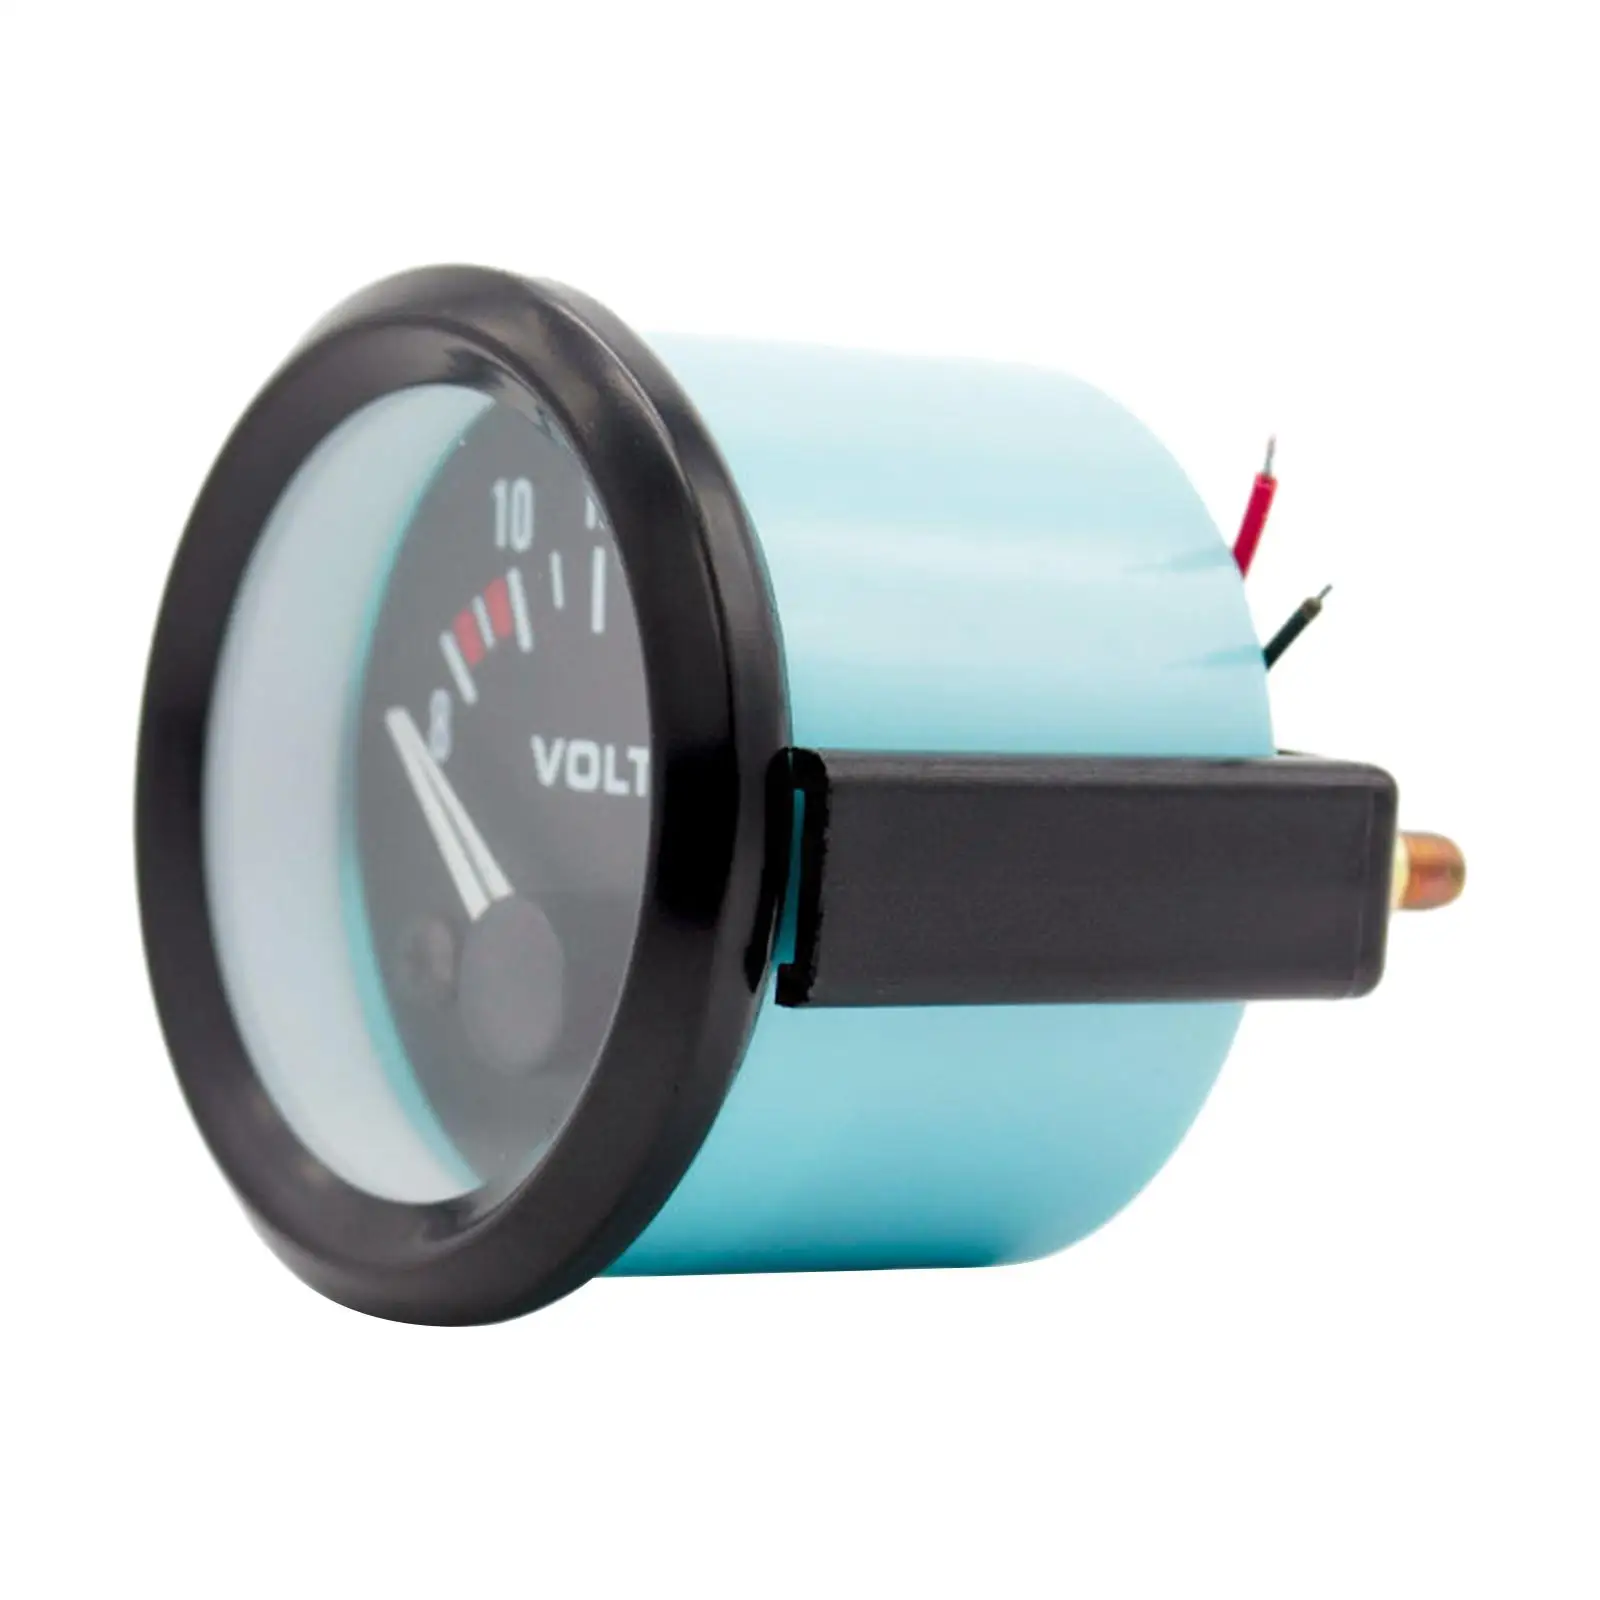 Electrical Car Voltmeter LED Light Replacement 12V for Modification Assembly Automotive Accessories Premium Easily Install